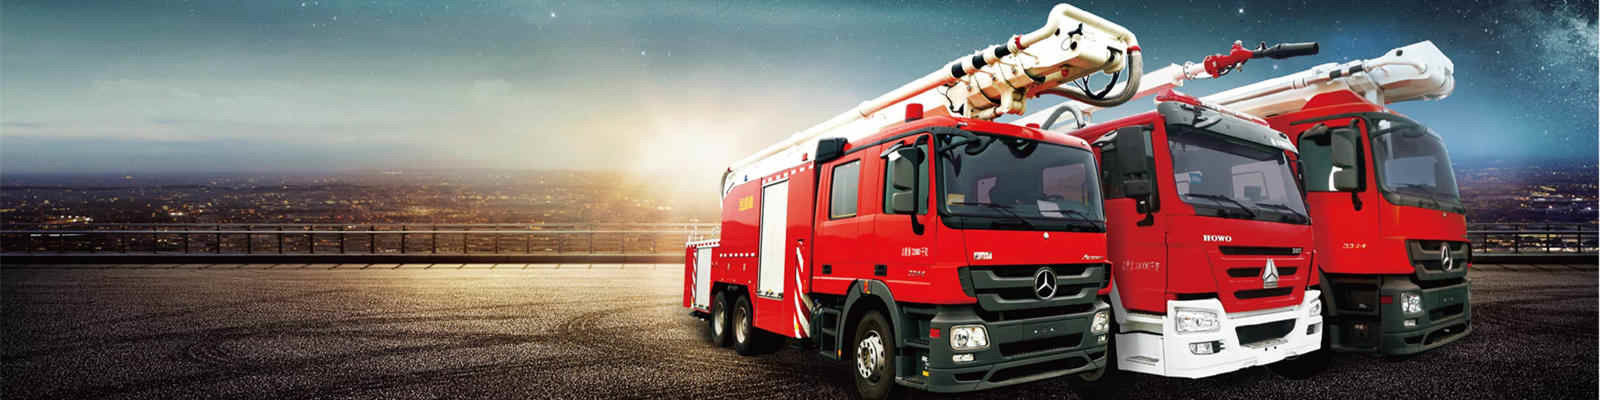 quality Commercial Fire Trucks factory